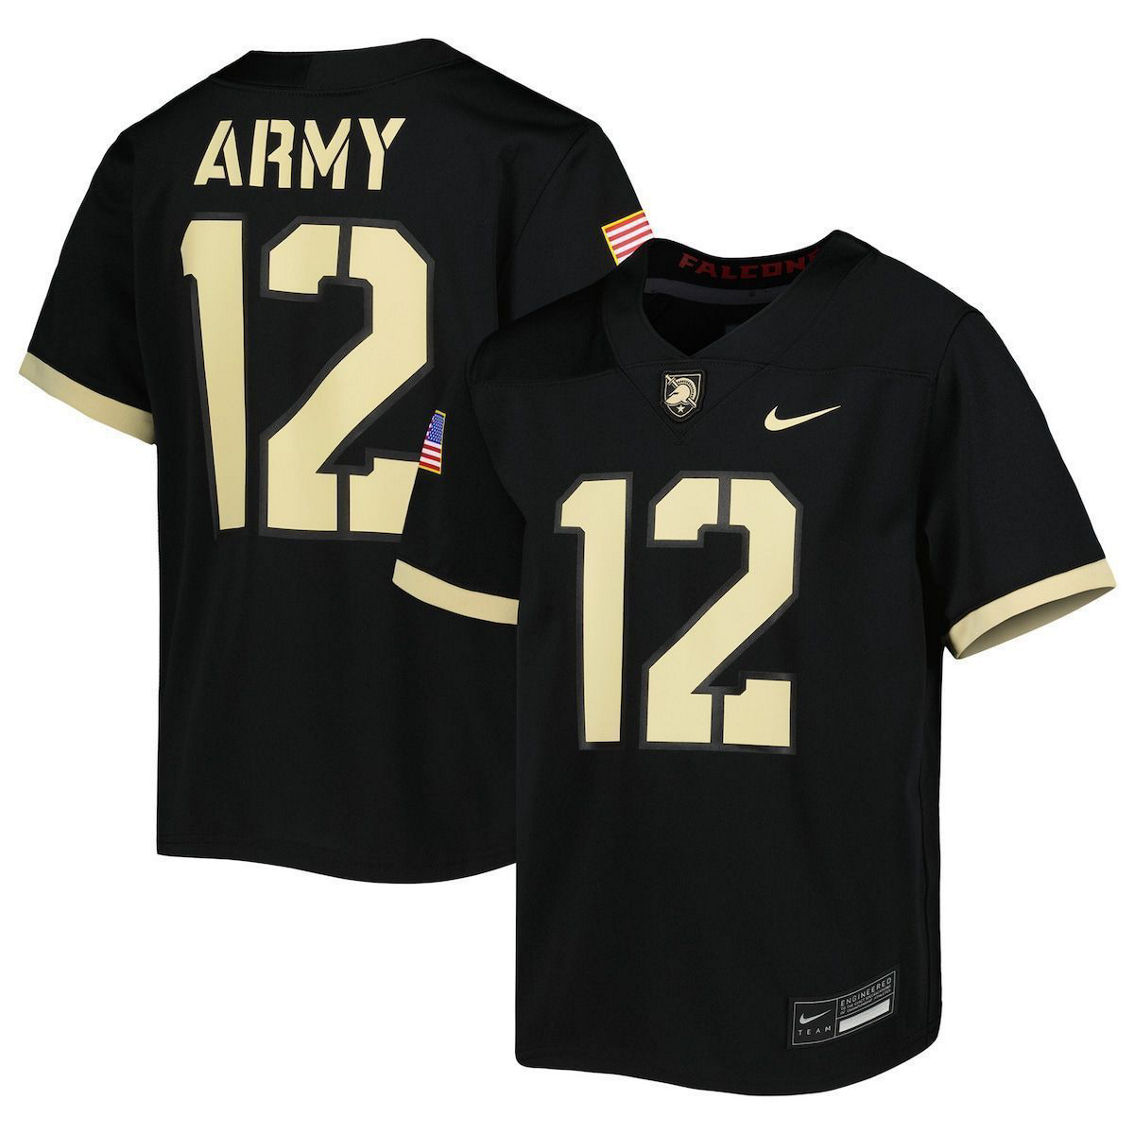 Nike Youth #12 Black Army Black Knights 1st Armored Division Old Ironsides Untouchable Football Jersey - Image 2 of 4